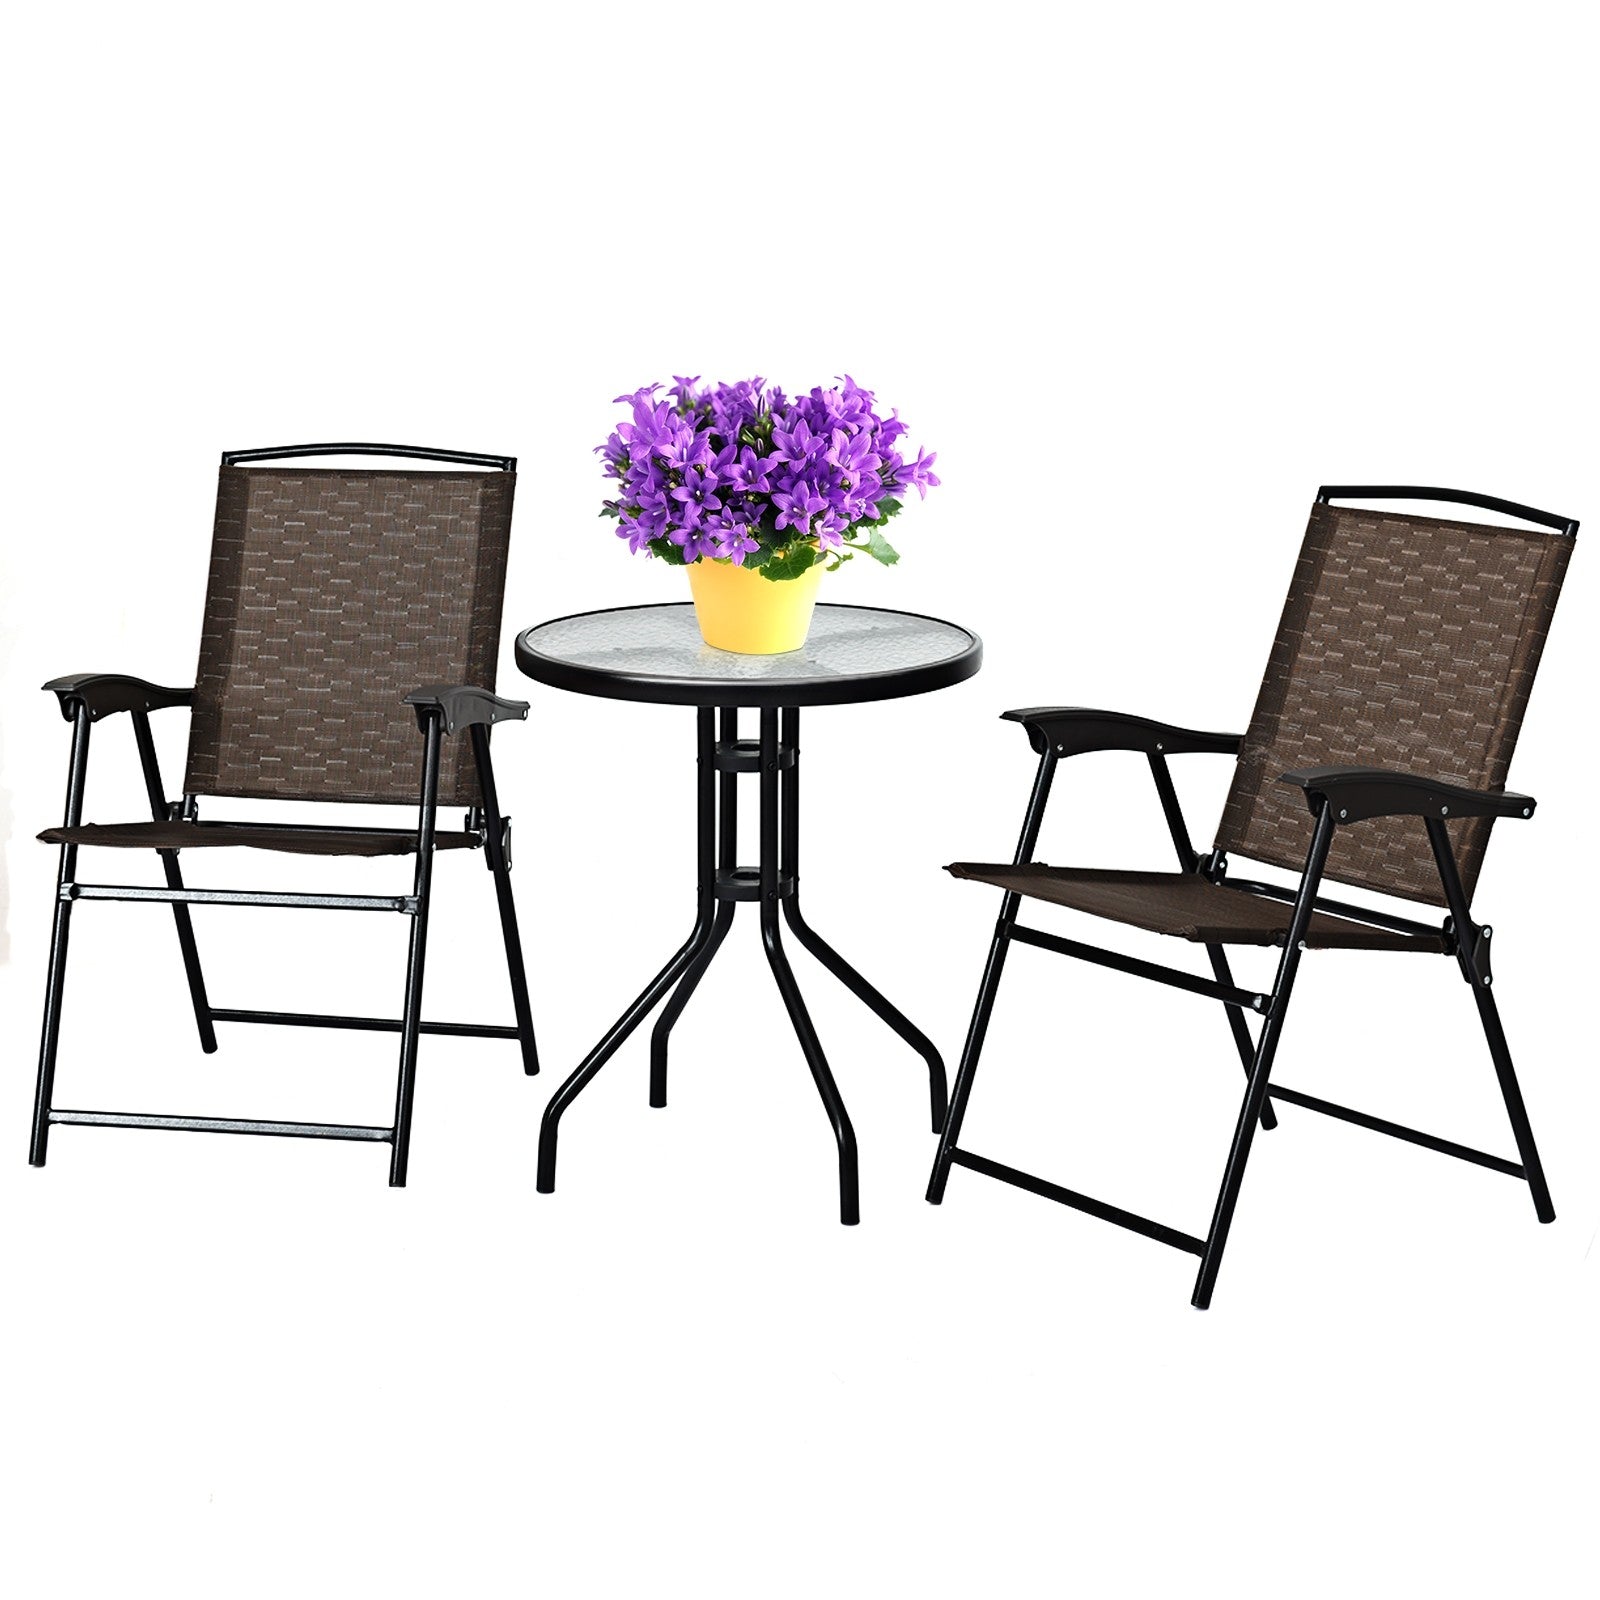 Giantex Patio Dining Set with 2 Patio Folding Chairs (Brown)